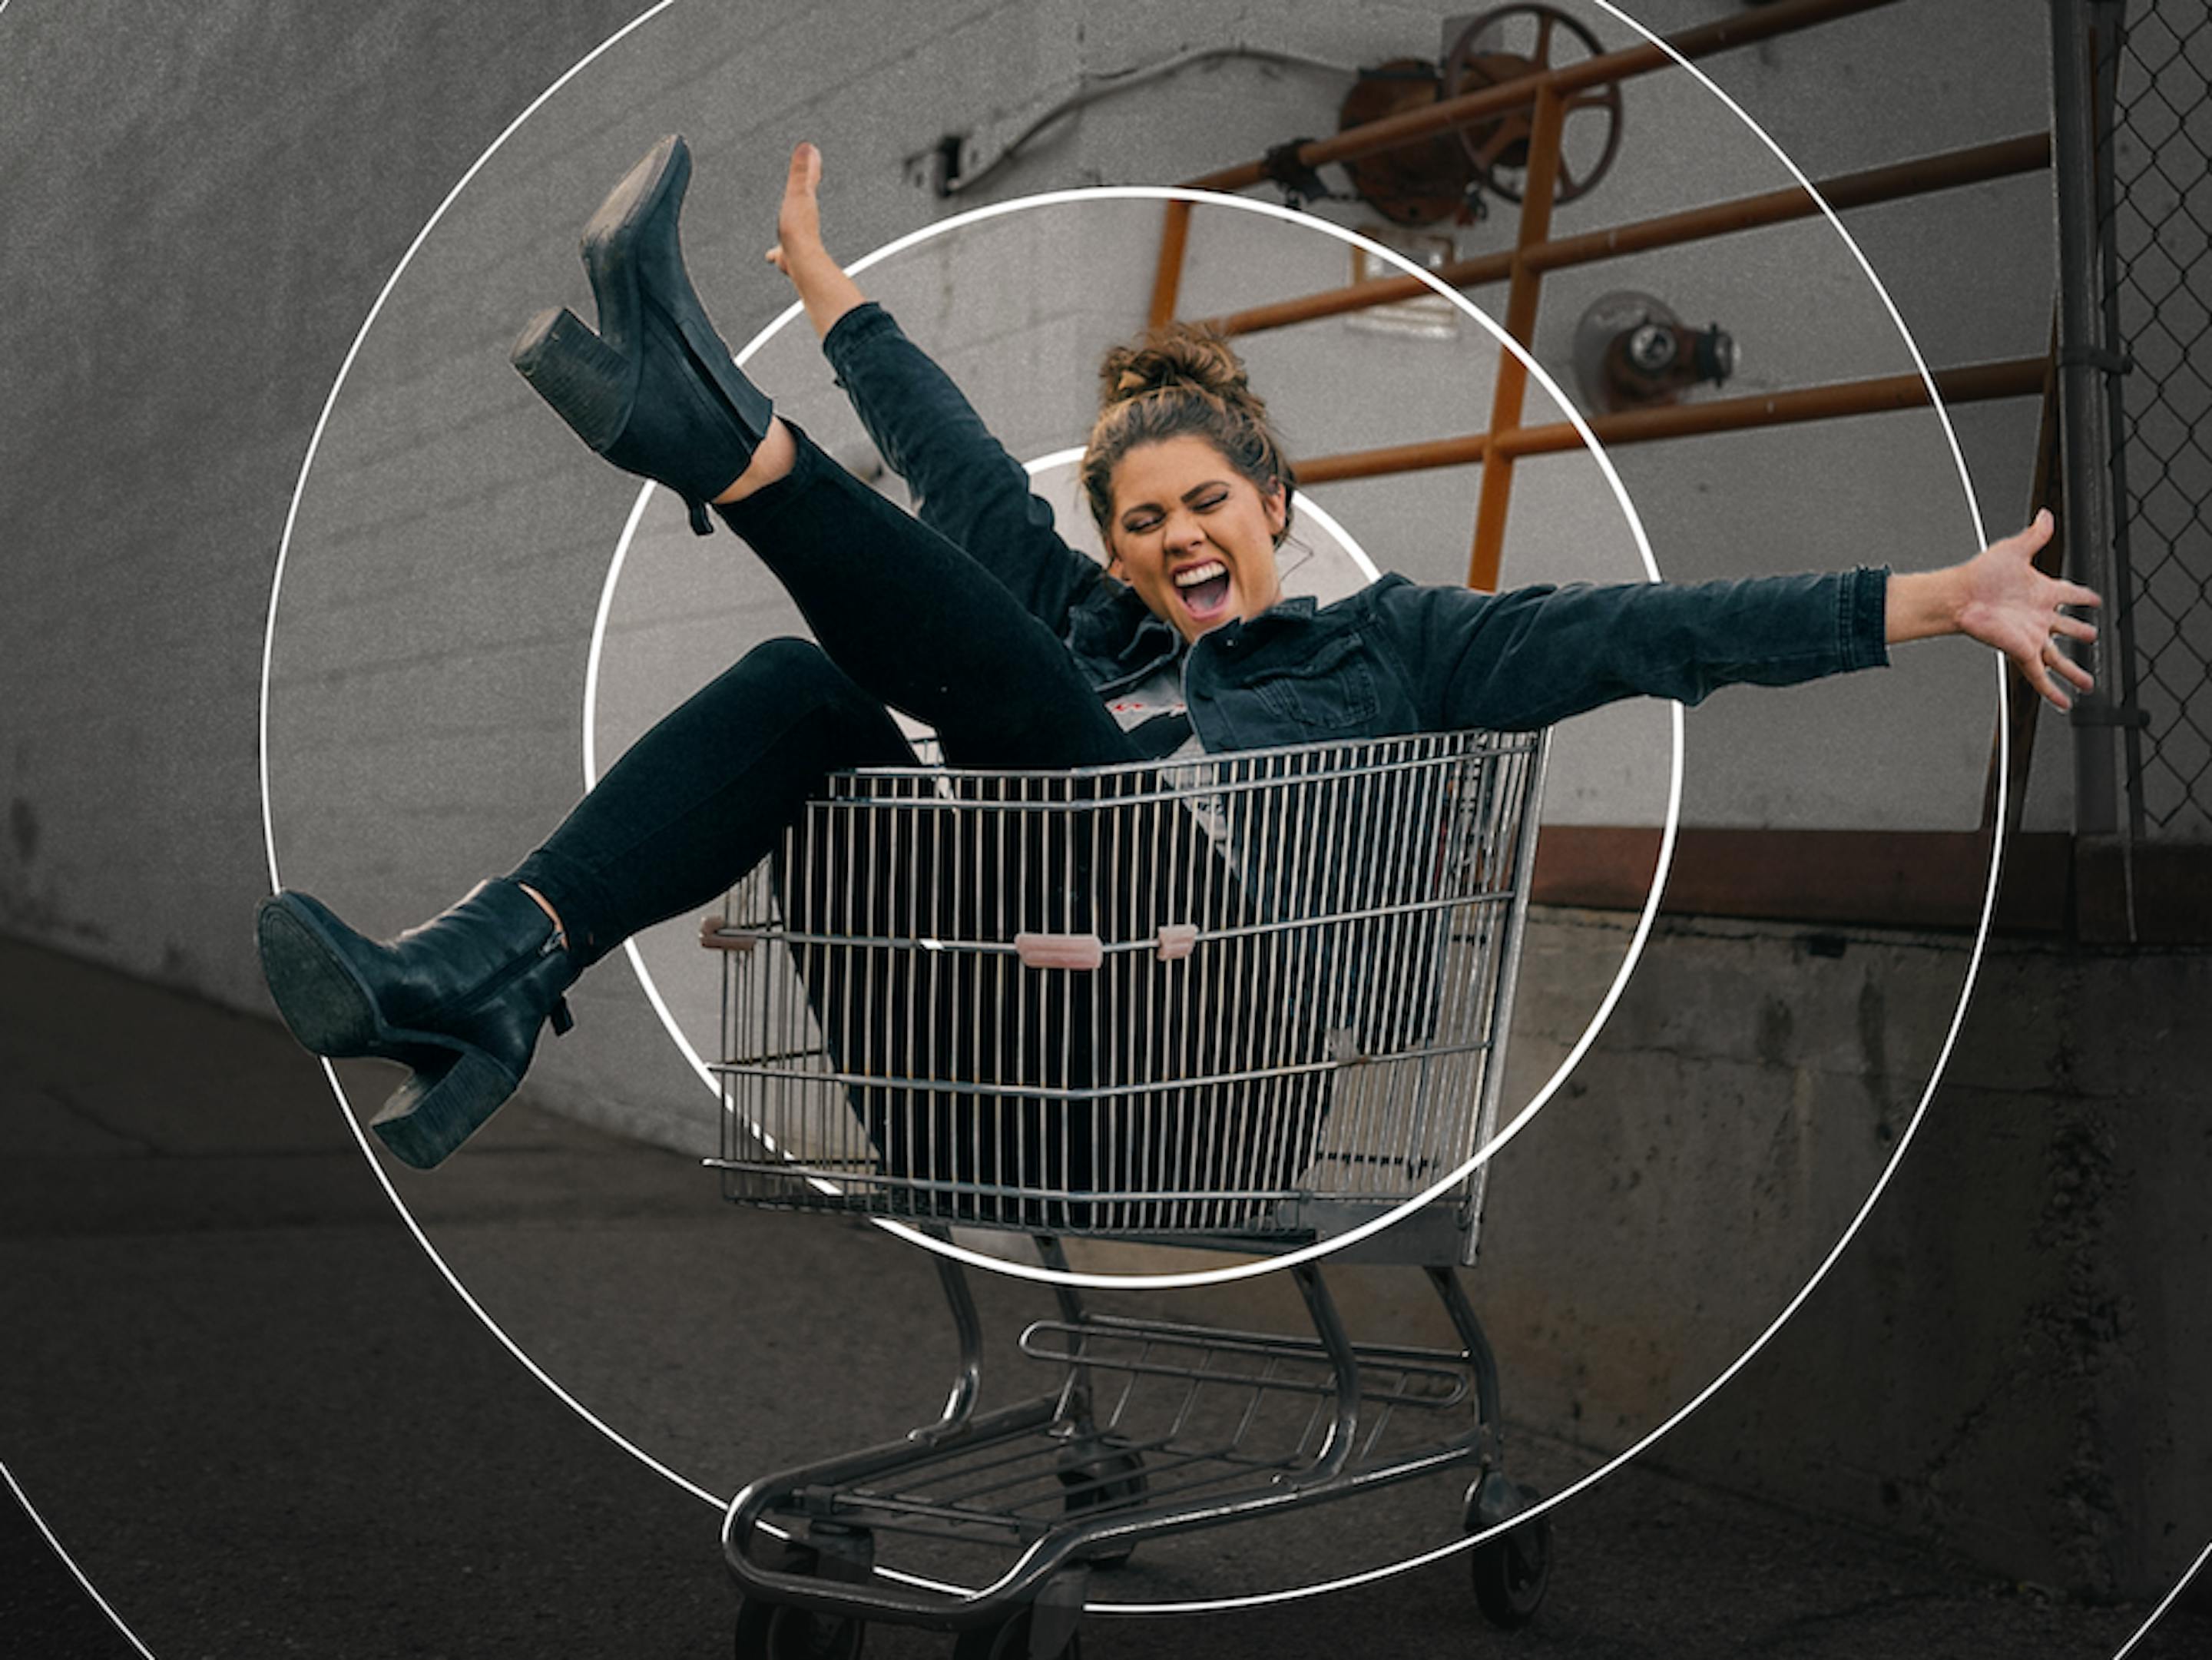 A woman cheers and kicks her leg up while sitting in a shopping cart